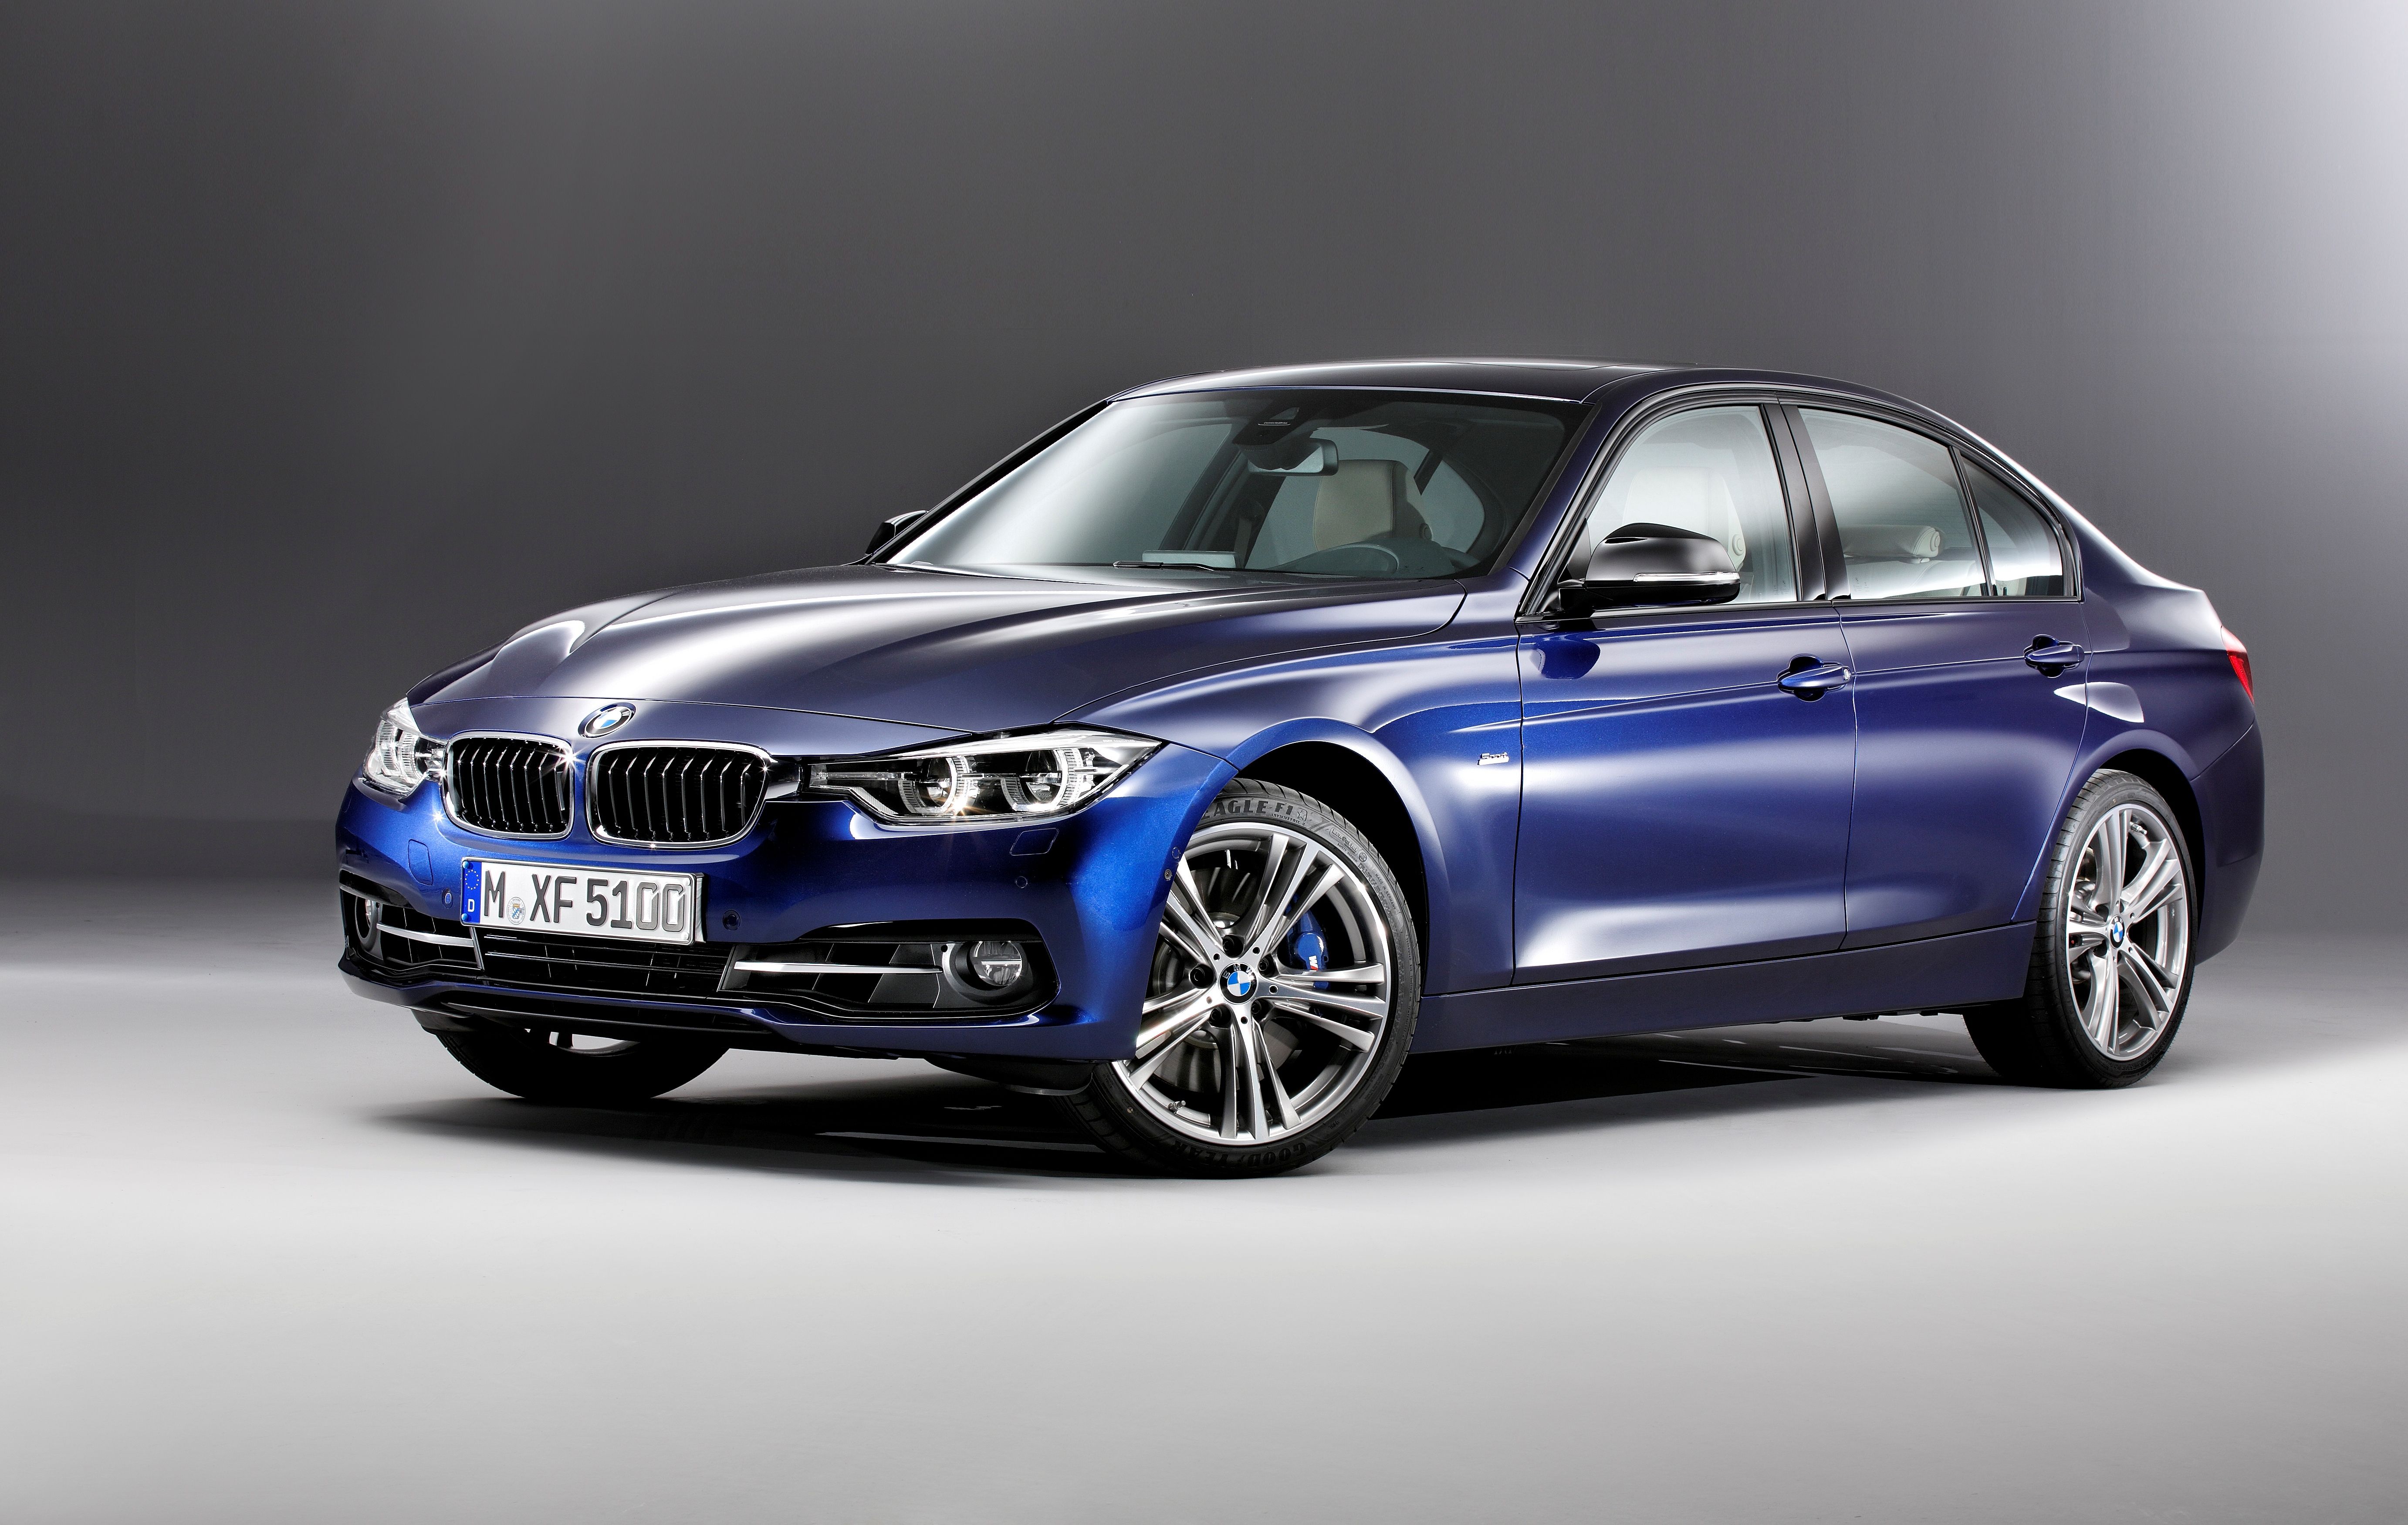 Latest BMW 3 Series Models On Image M5dp And BMW 3 Series New On